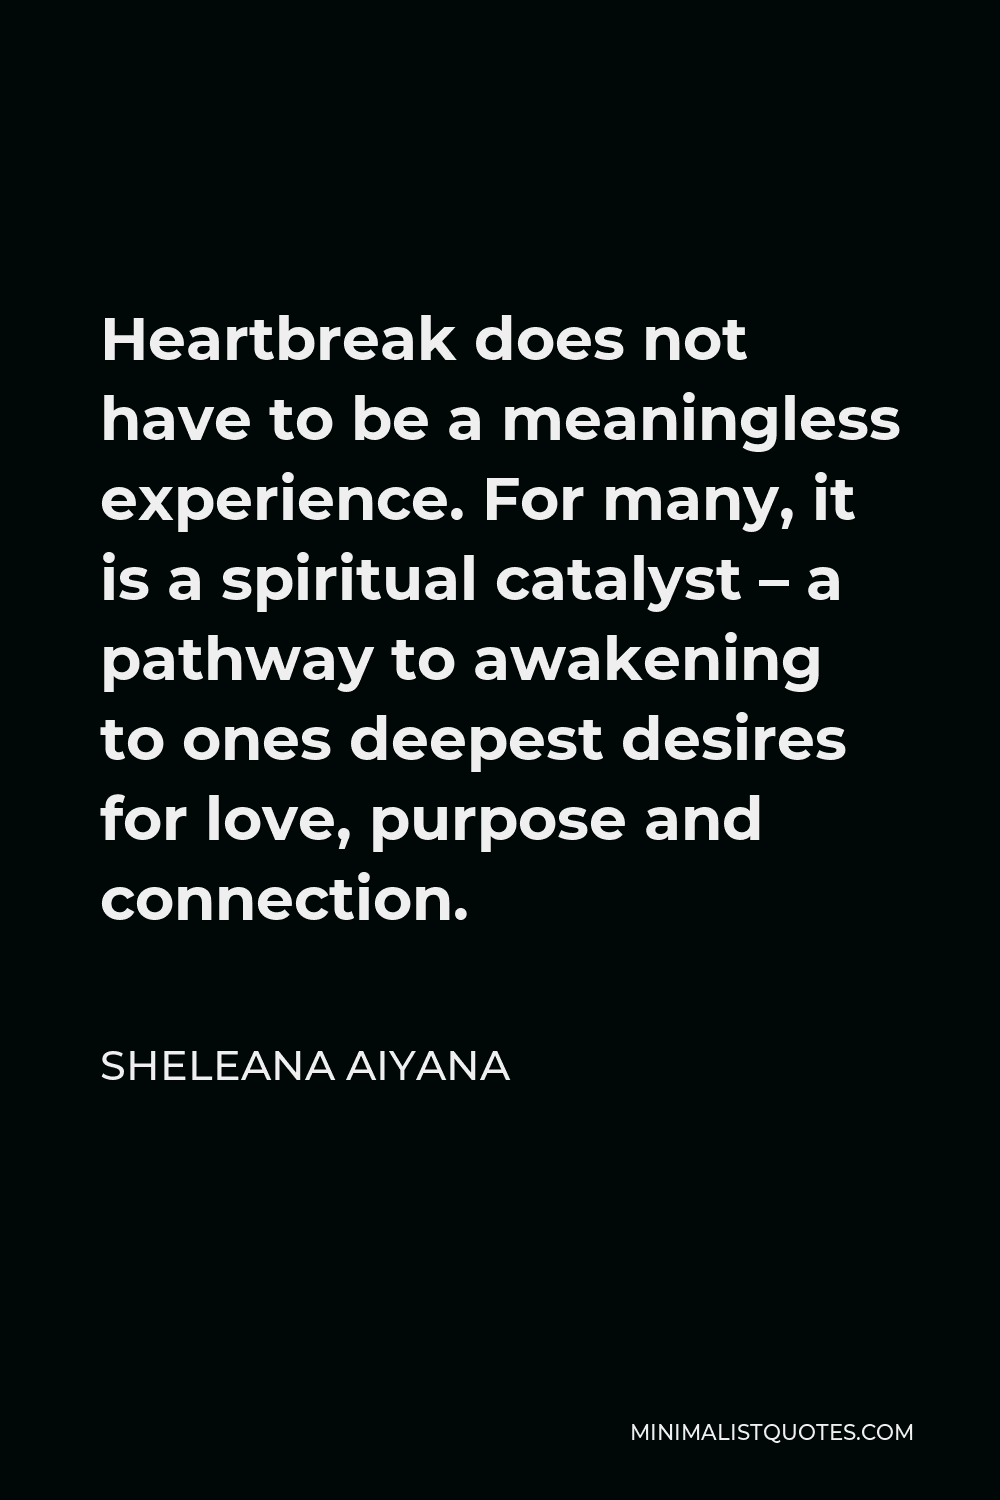 Sheleana Aiyana Quote - Heartbreak does not have to be a meaningless experience. For many, it is a spiritual catalyst – a pathway to awakening to ones deepest desires for love, purpose and connection.